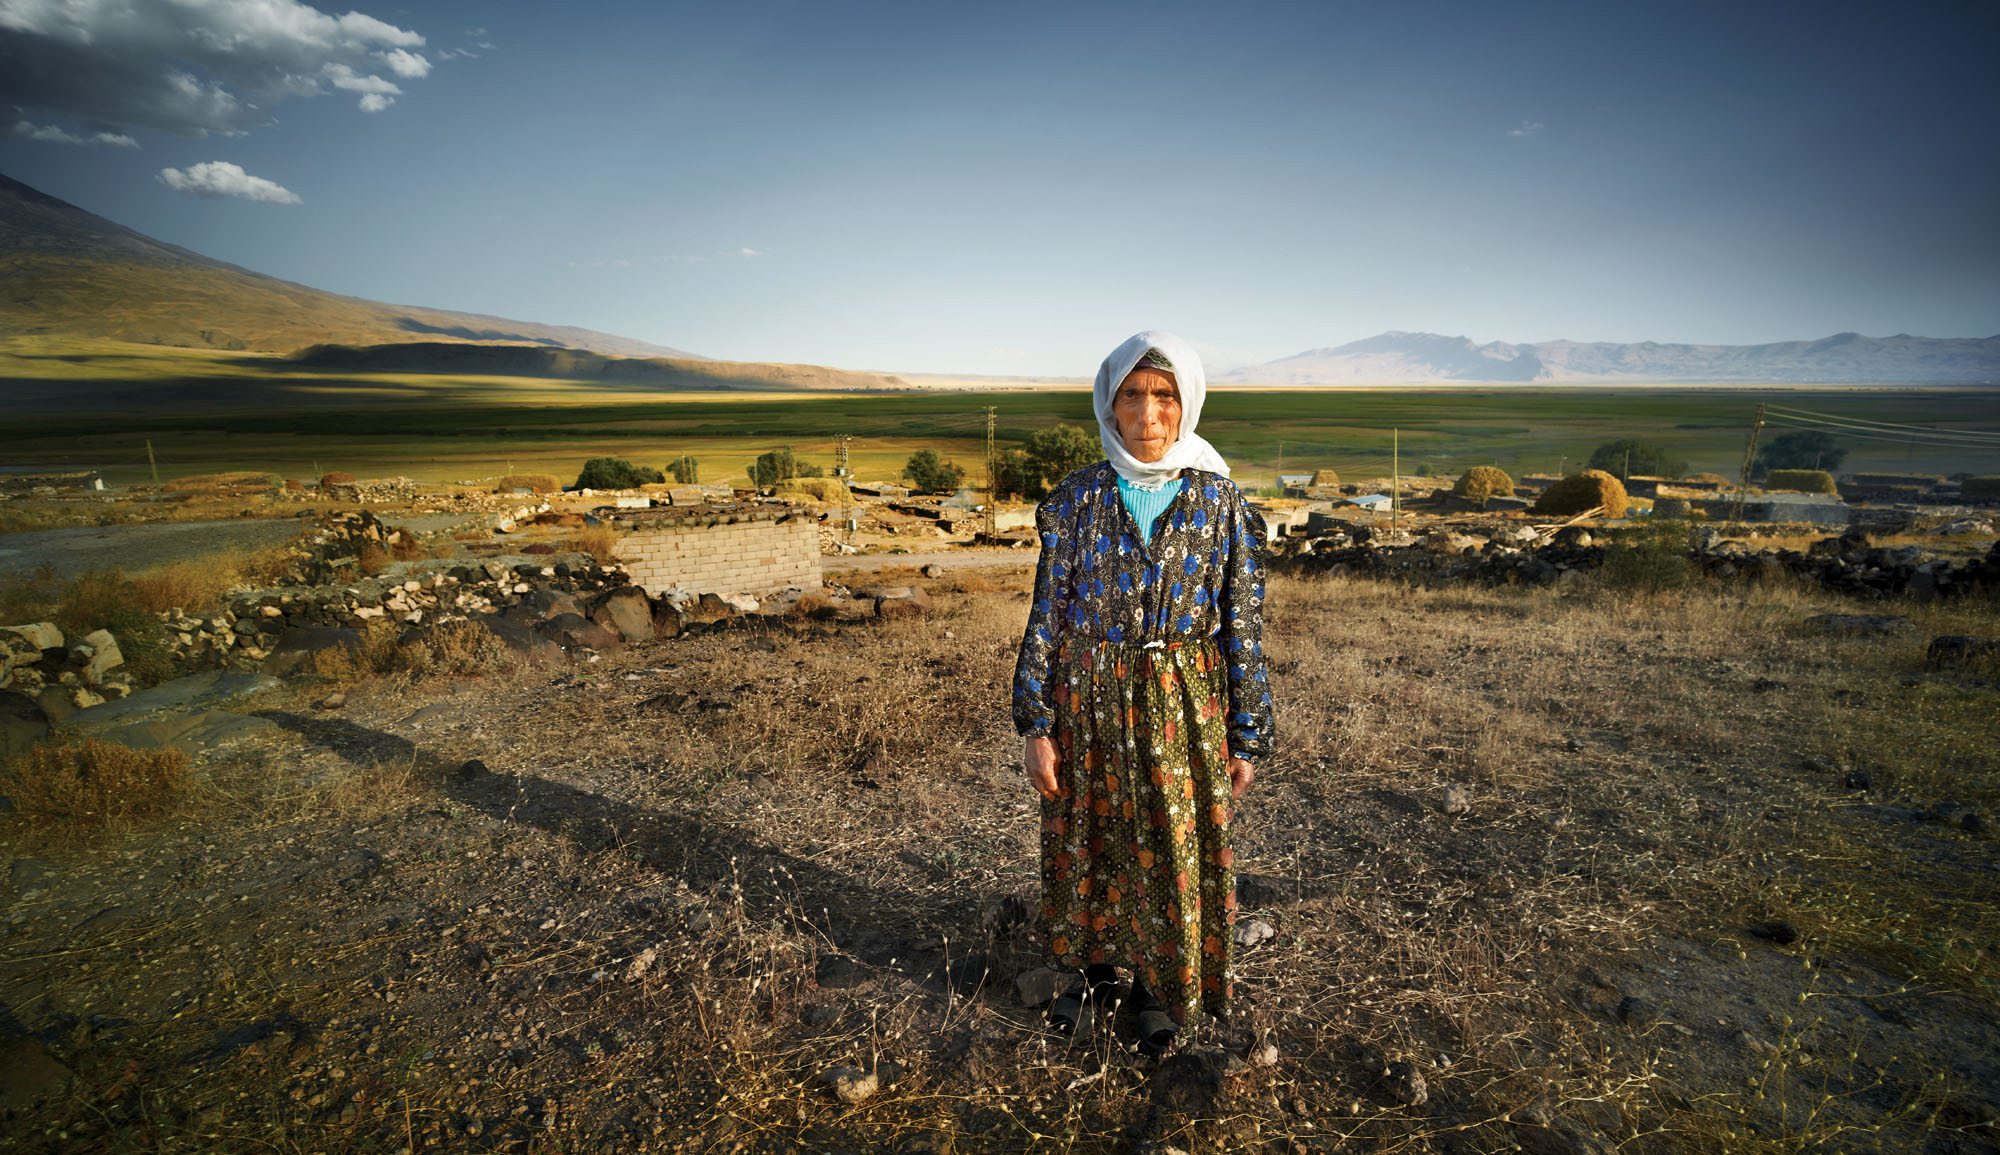 Kurdish woman, Eastern Turkey. Phase One A-Series, P65+, 23mm lens, f8 @ 1/30 second, ISO 50